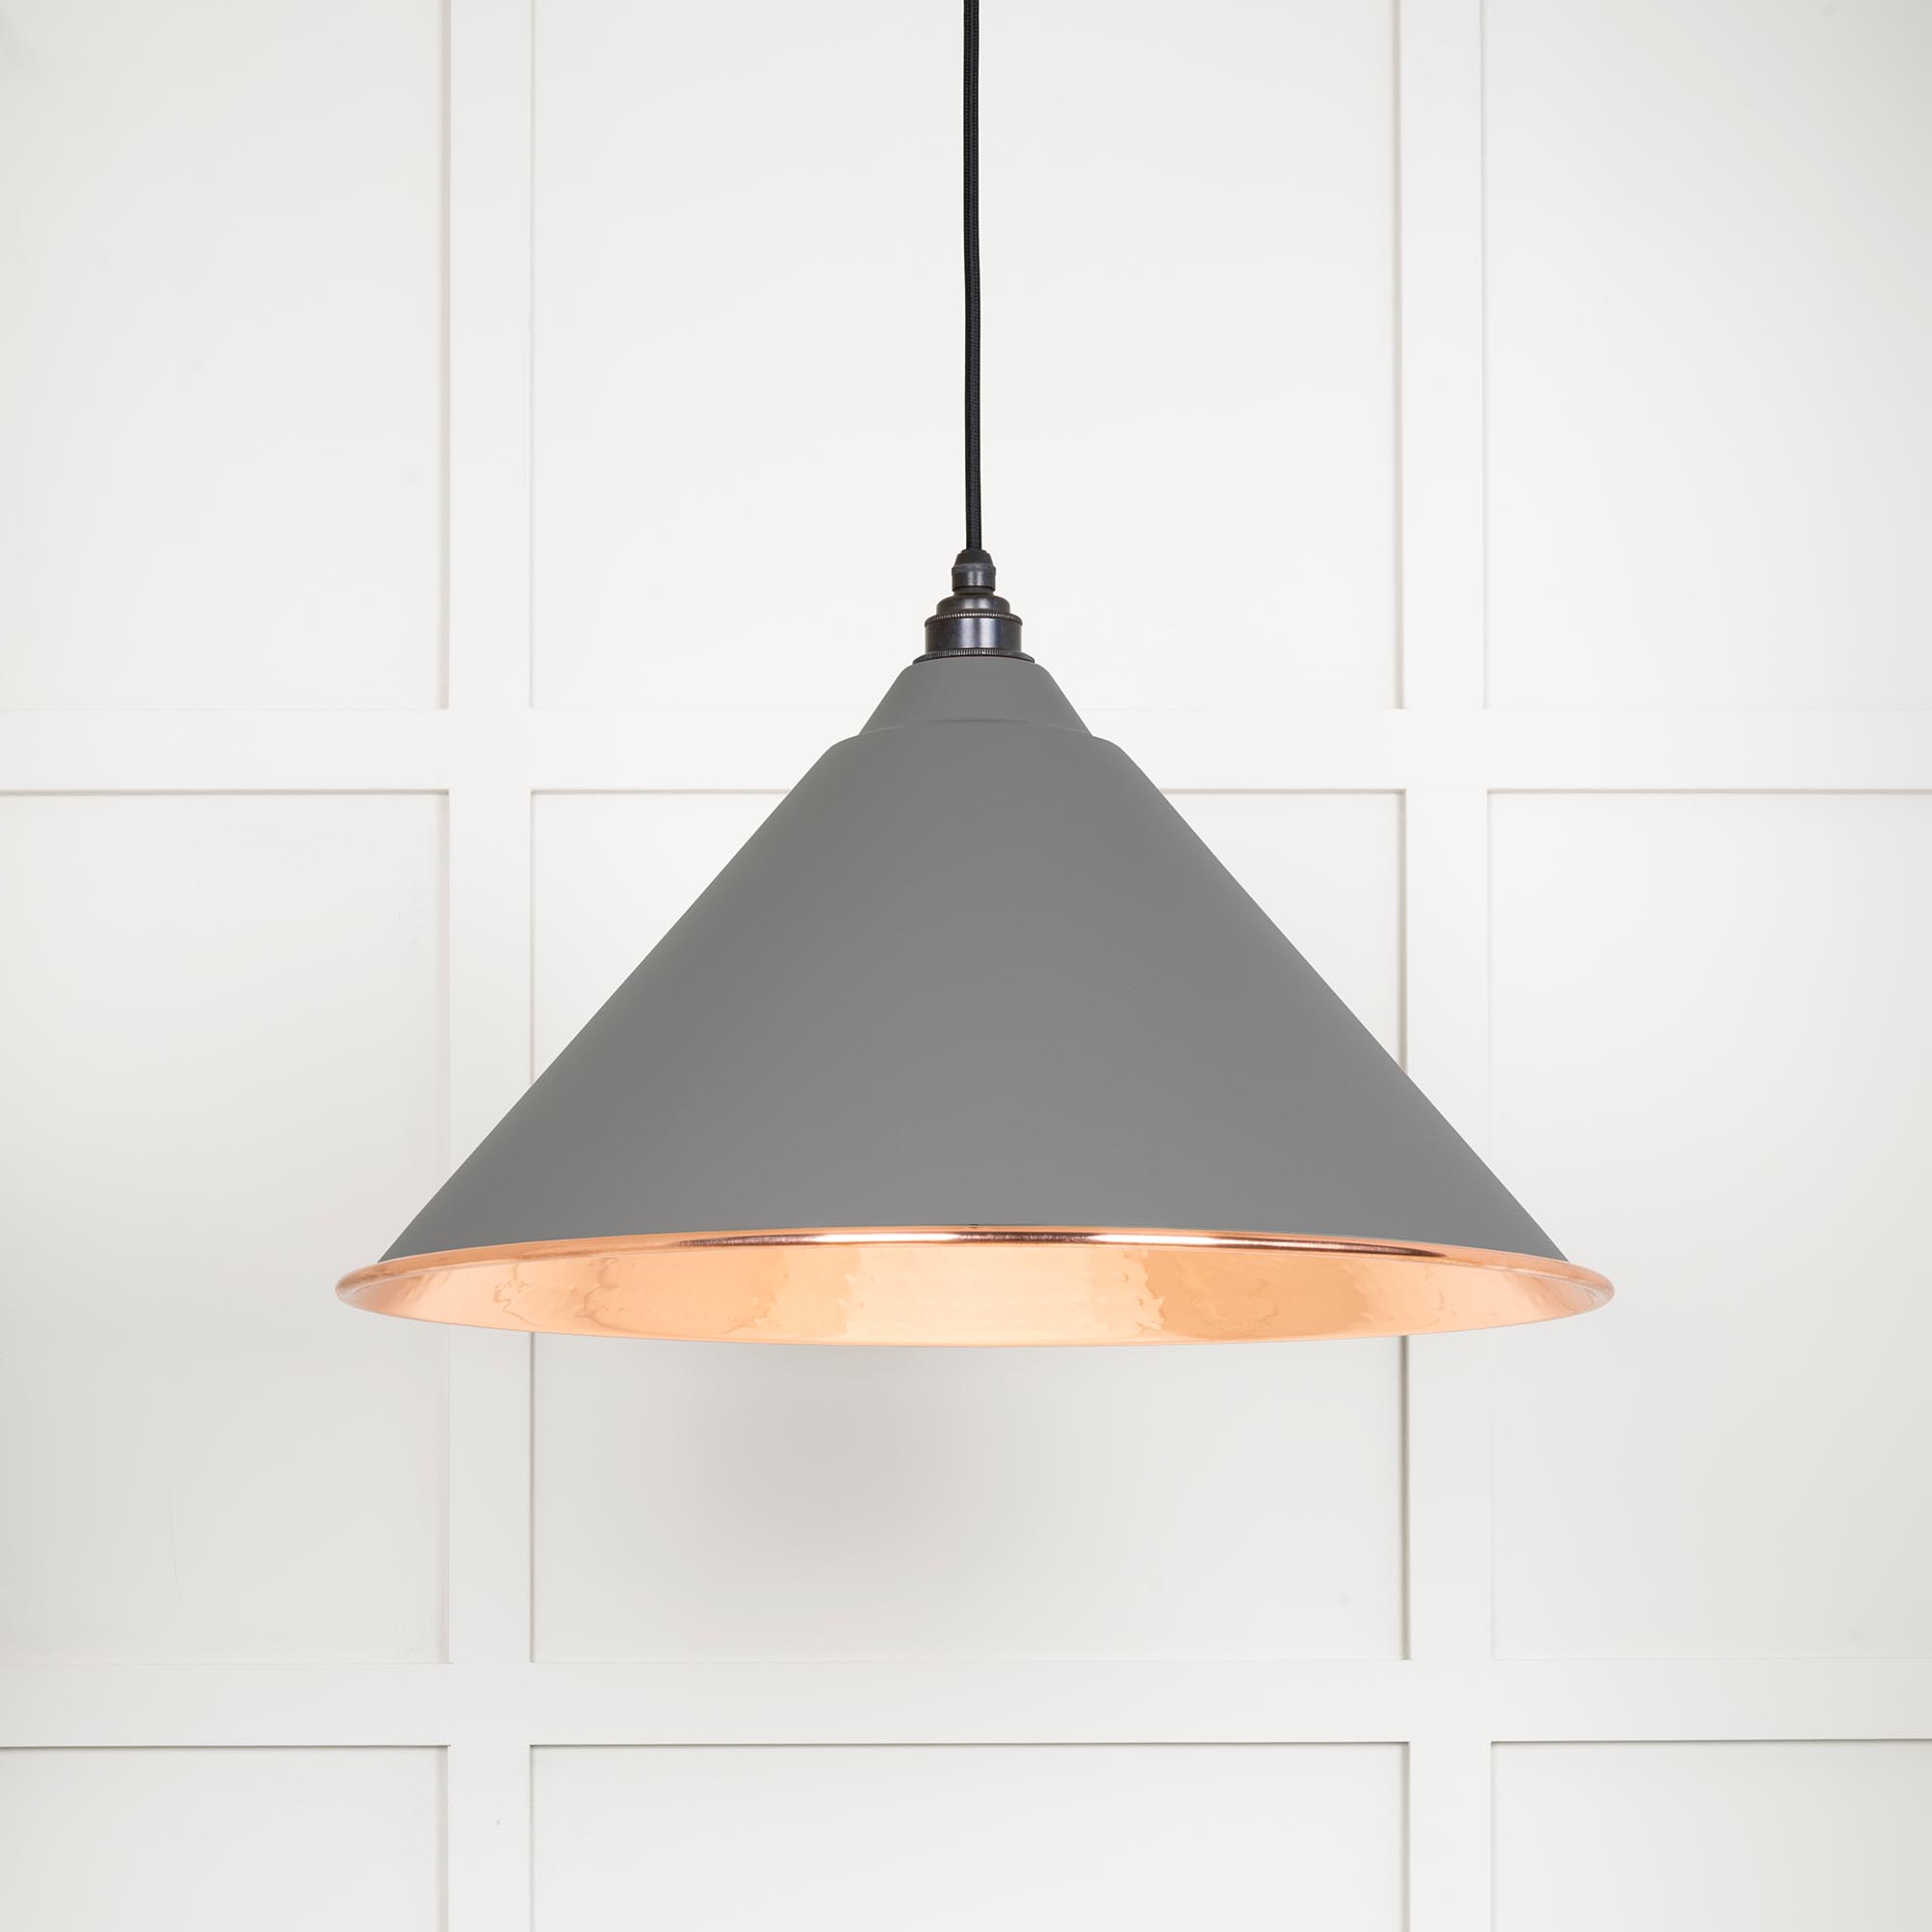 Hammered Copper Hockley Pendant in Bluff